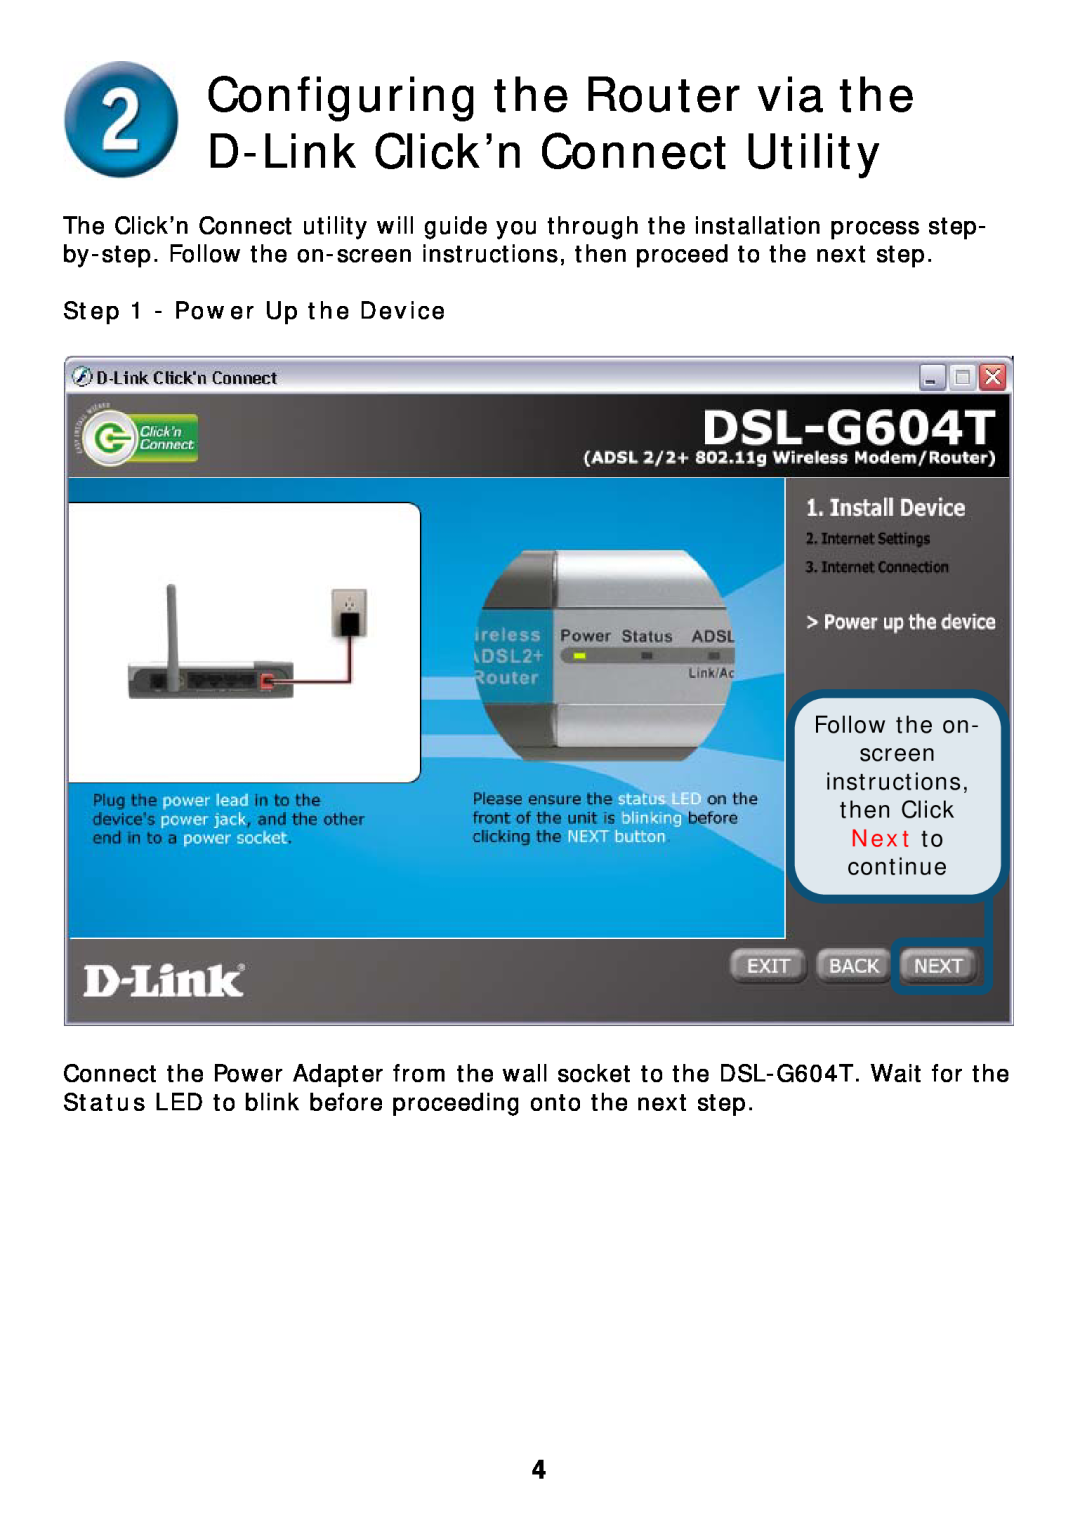 D-Link DSL-G604T Configuring the Router via the D-Link Click’n Connect Utility, Power Up the Device, Next to continue 